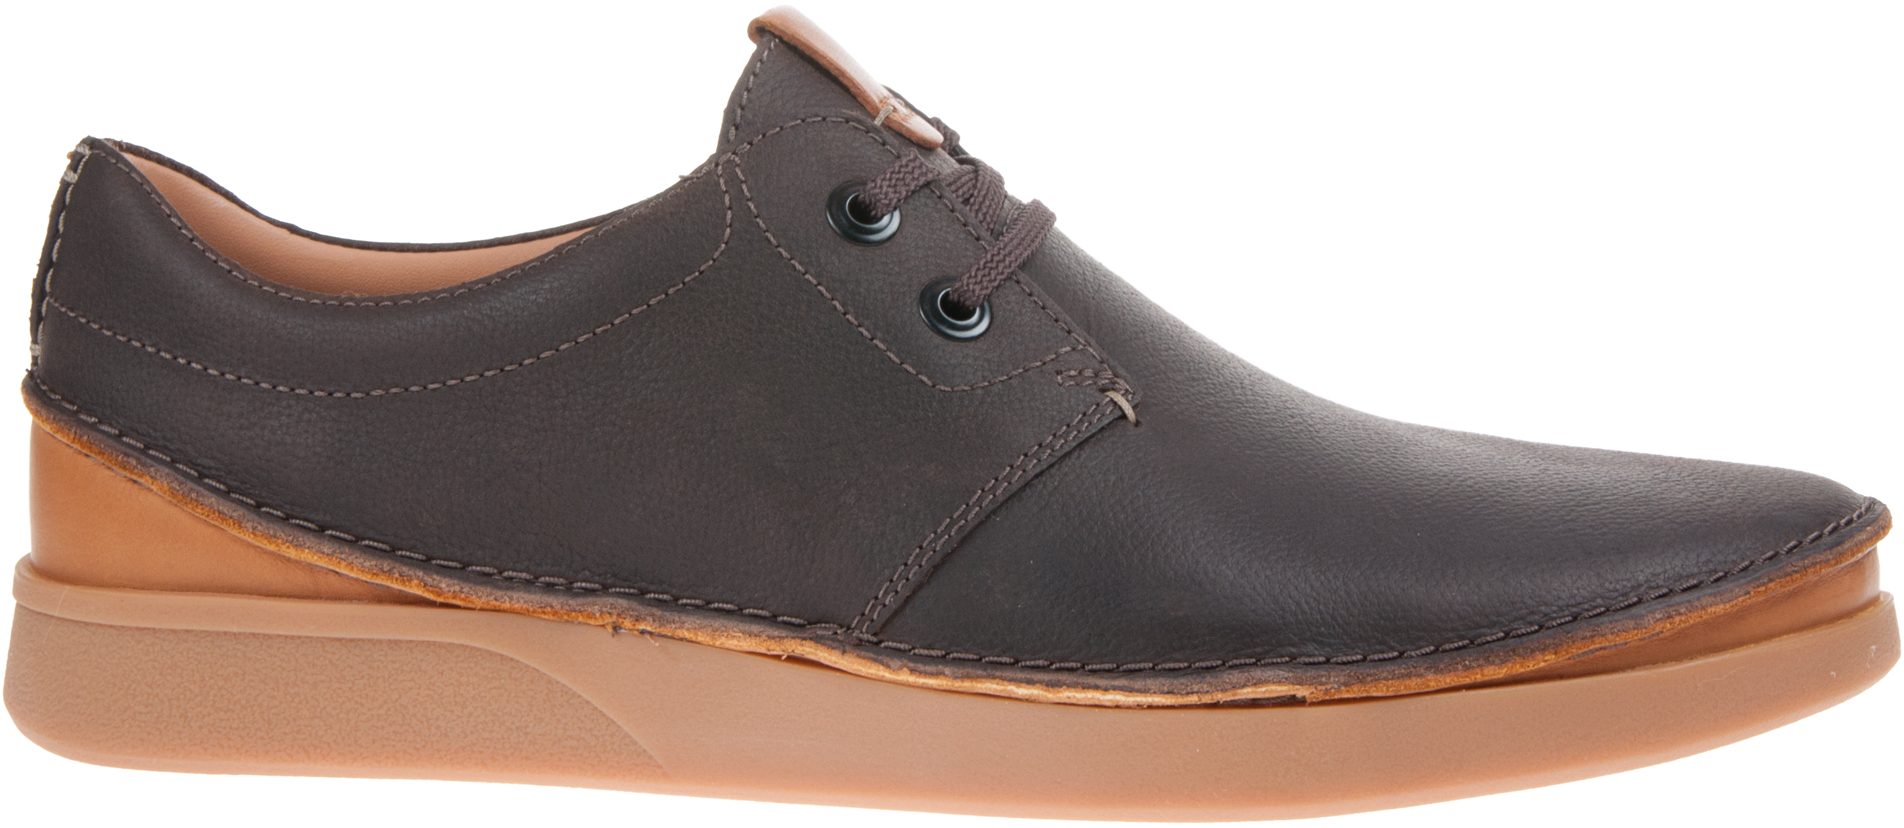 Clarks Oakland Lace Dark Brown Leather 26135393 - Casual Shoes ...